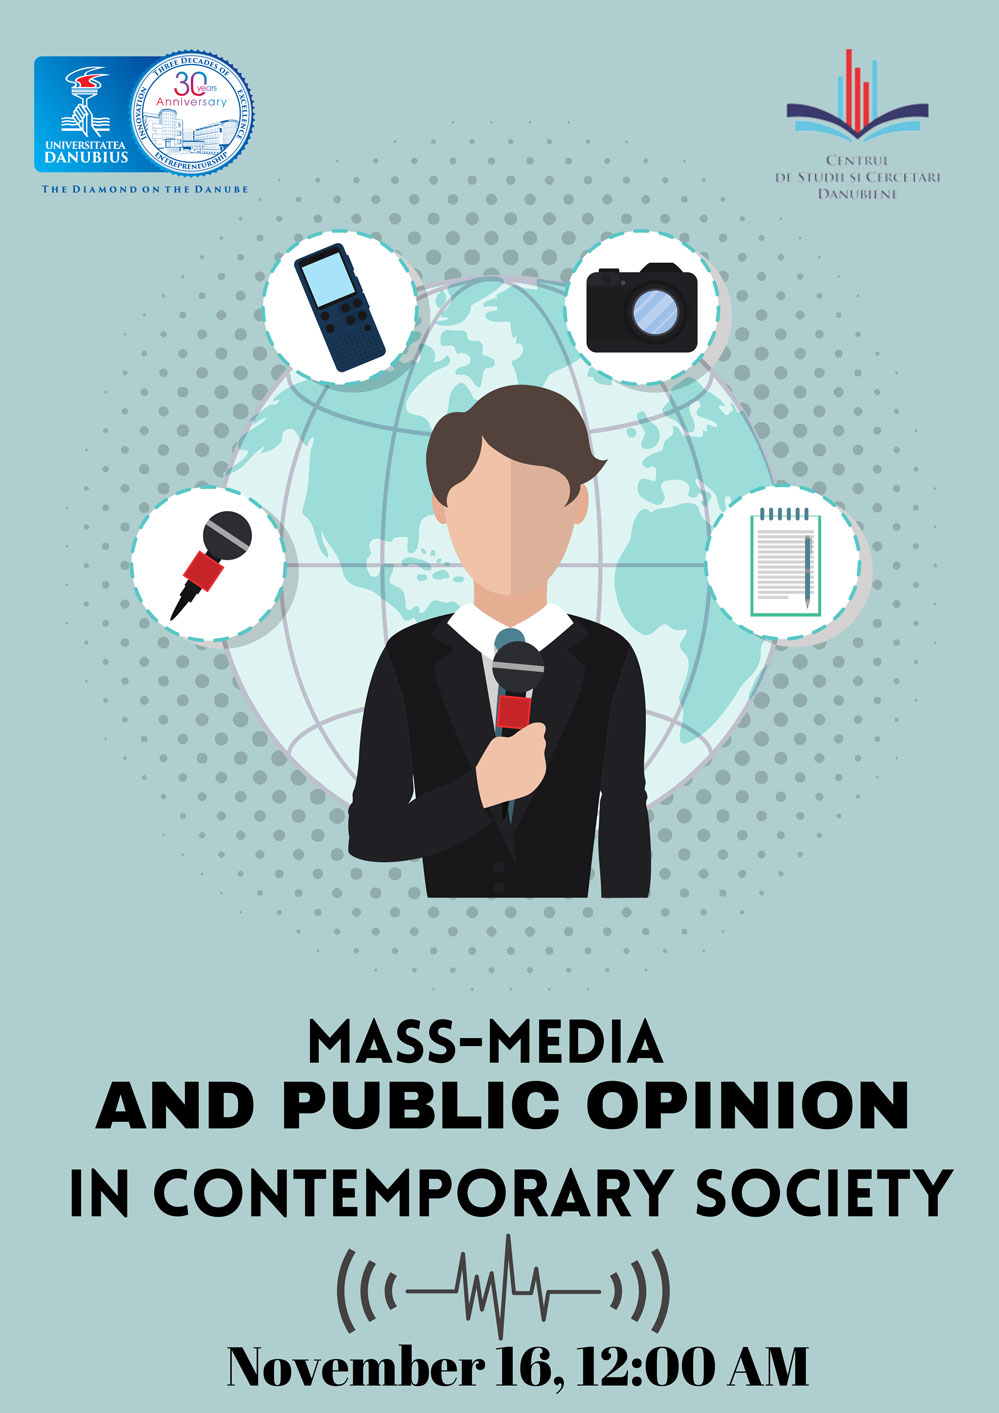 WORKSHOP - MASS-MEDIA AND PUBLIC OPINION IN CONTEMPORARY SOCIETY